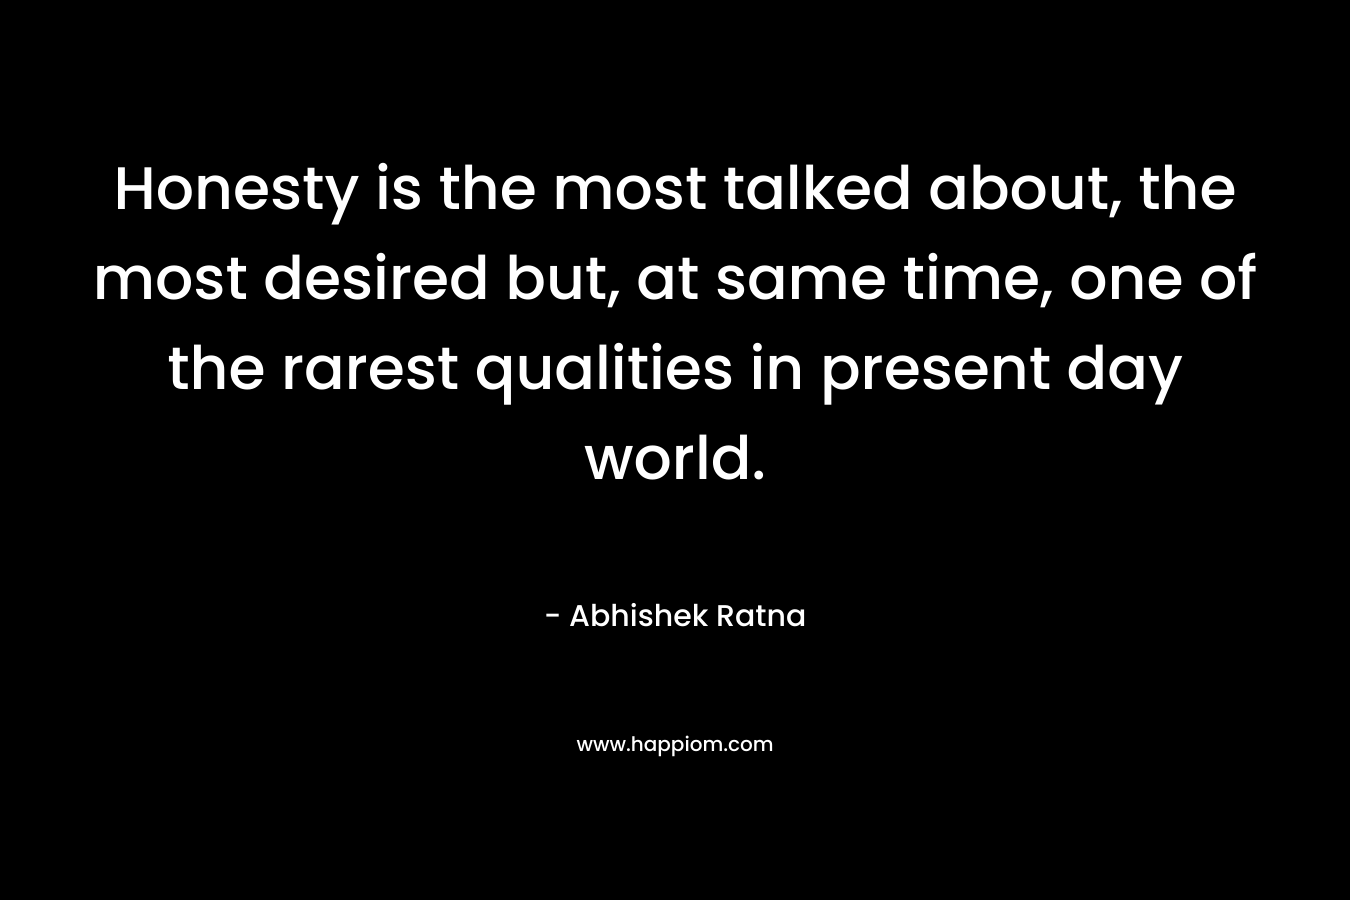 Honesty is the most talked about, the most desired but, at same time, one of the rarest qualities in present day world.